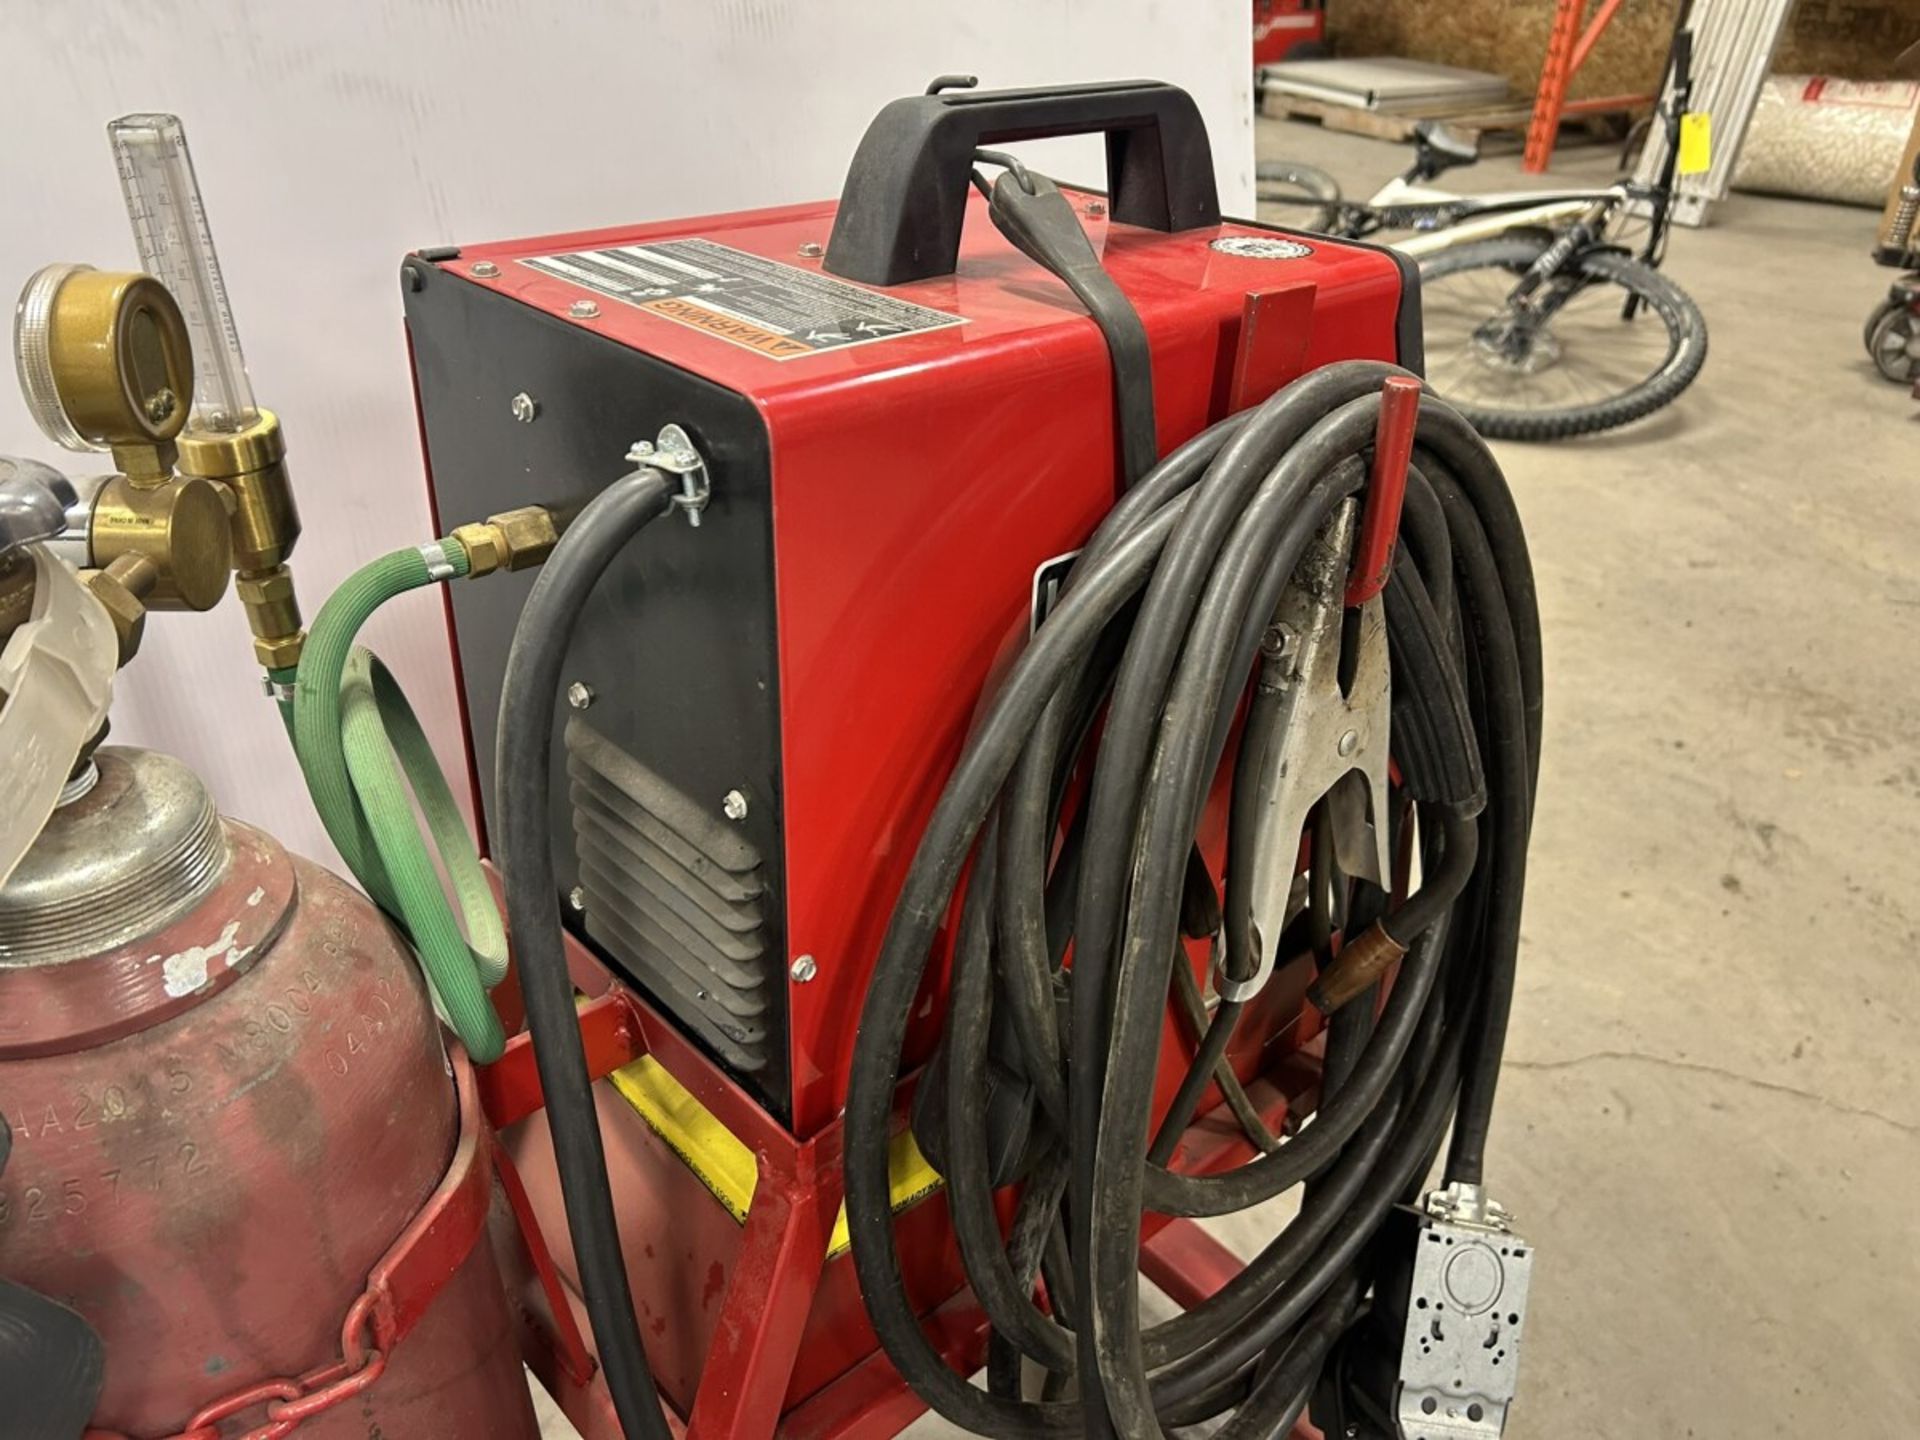 LINCOLN ELECTRIC SP-170T MIG WELDING POWER SOURCE W/ CABLES, CART AND BOTTLE S/N 10261-U1970905182 - Bild 5 aus 9